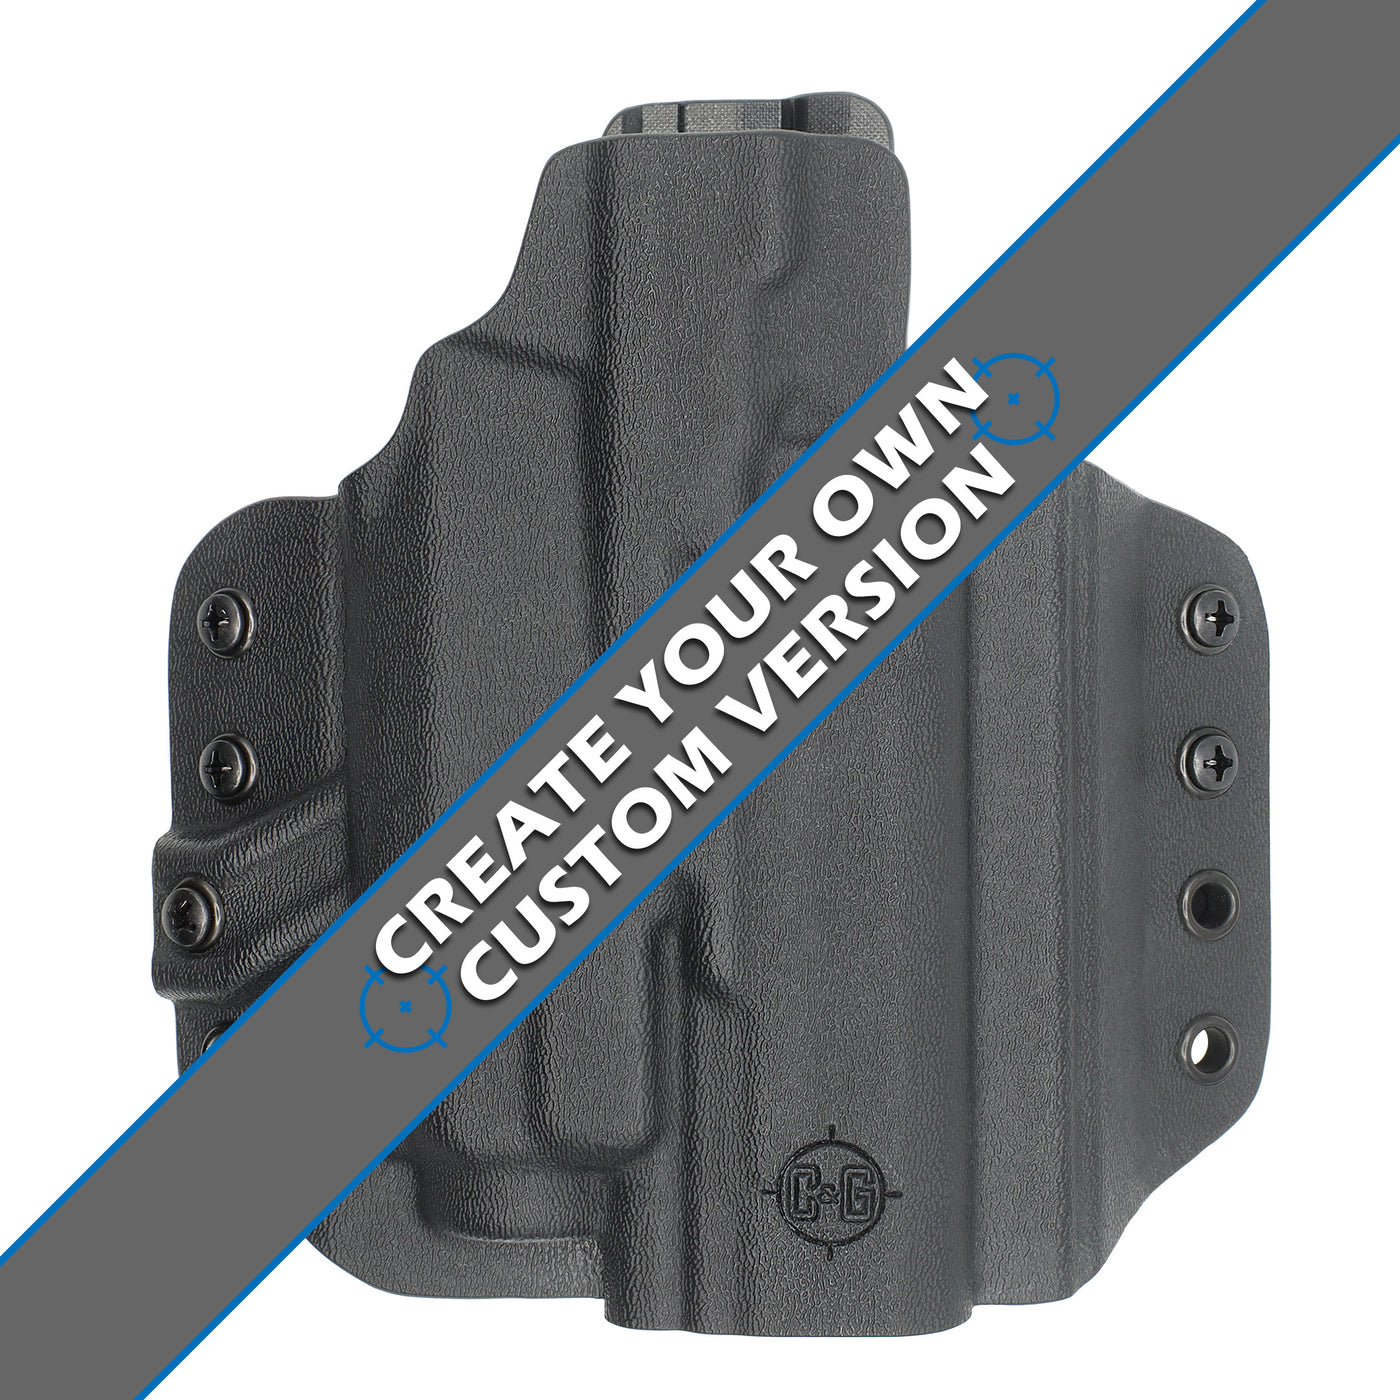 C&G Holsters custom OWB Tactical CZ P07/P09 Streamlight TLR8